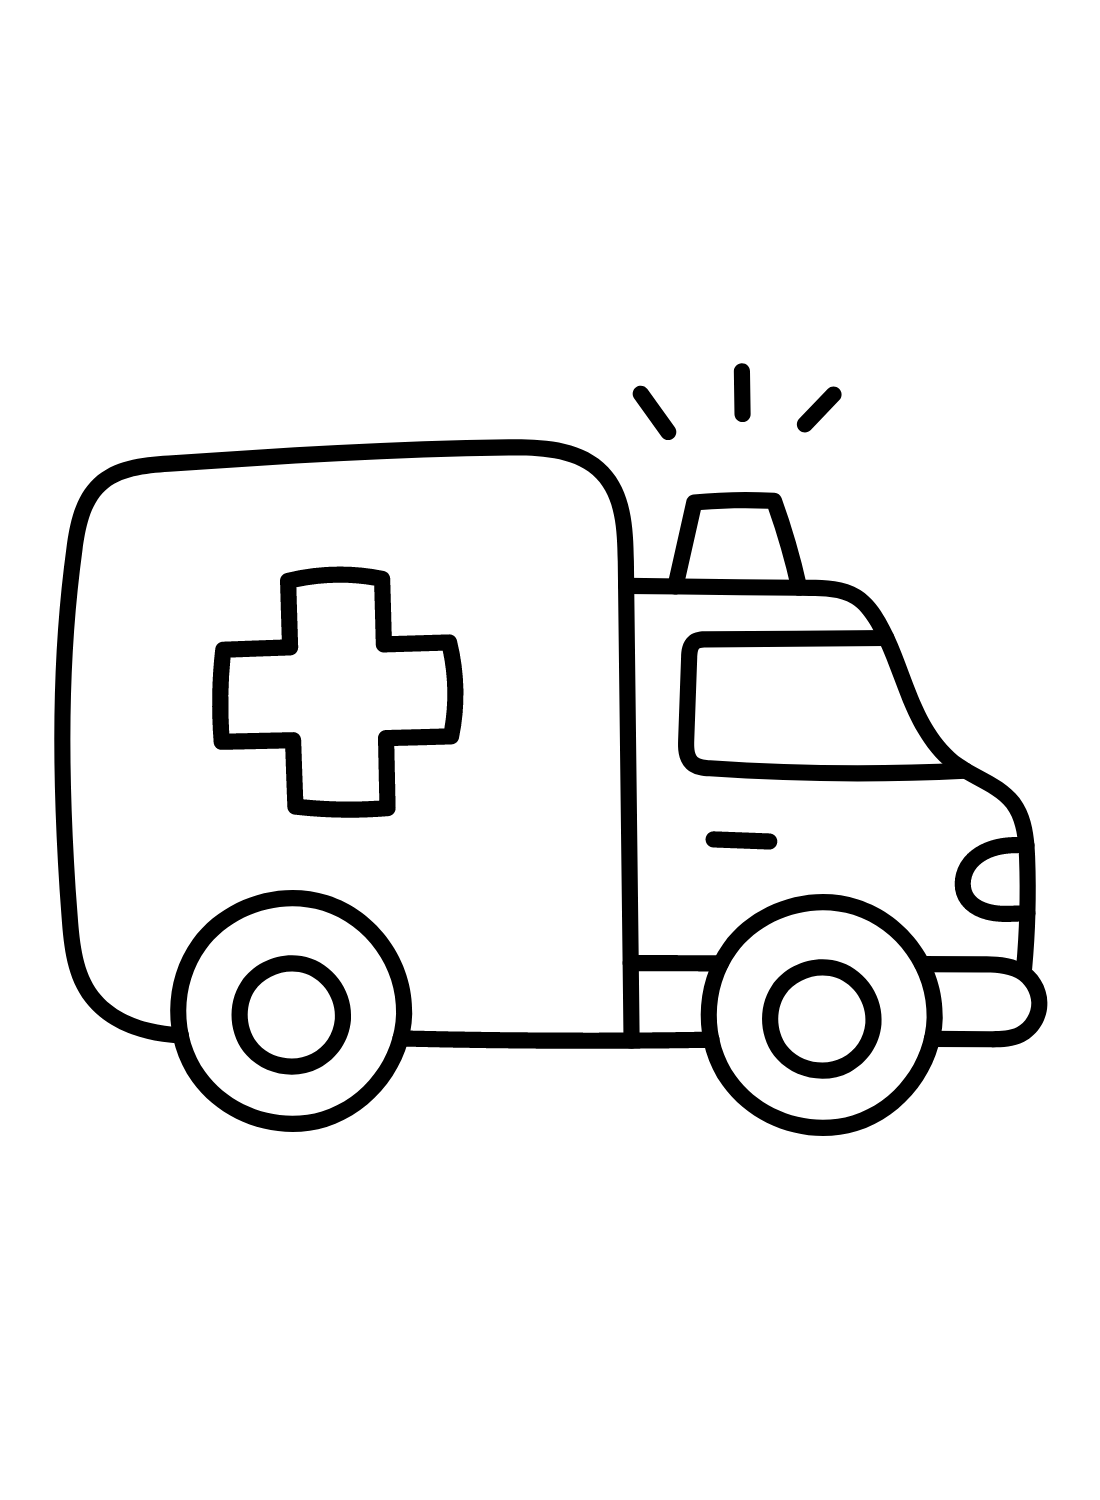 Ambulance for Preschool Coloring Pages